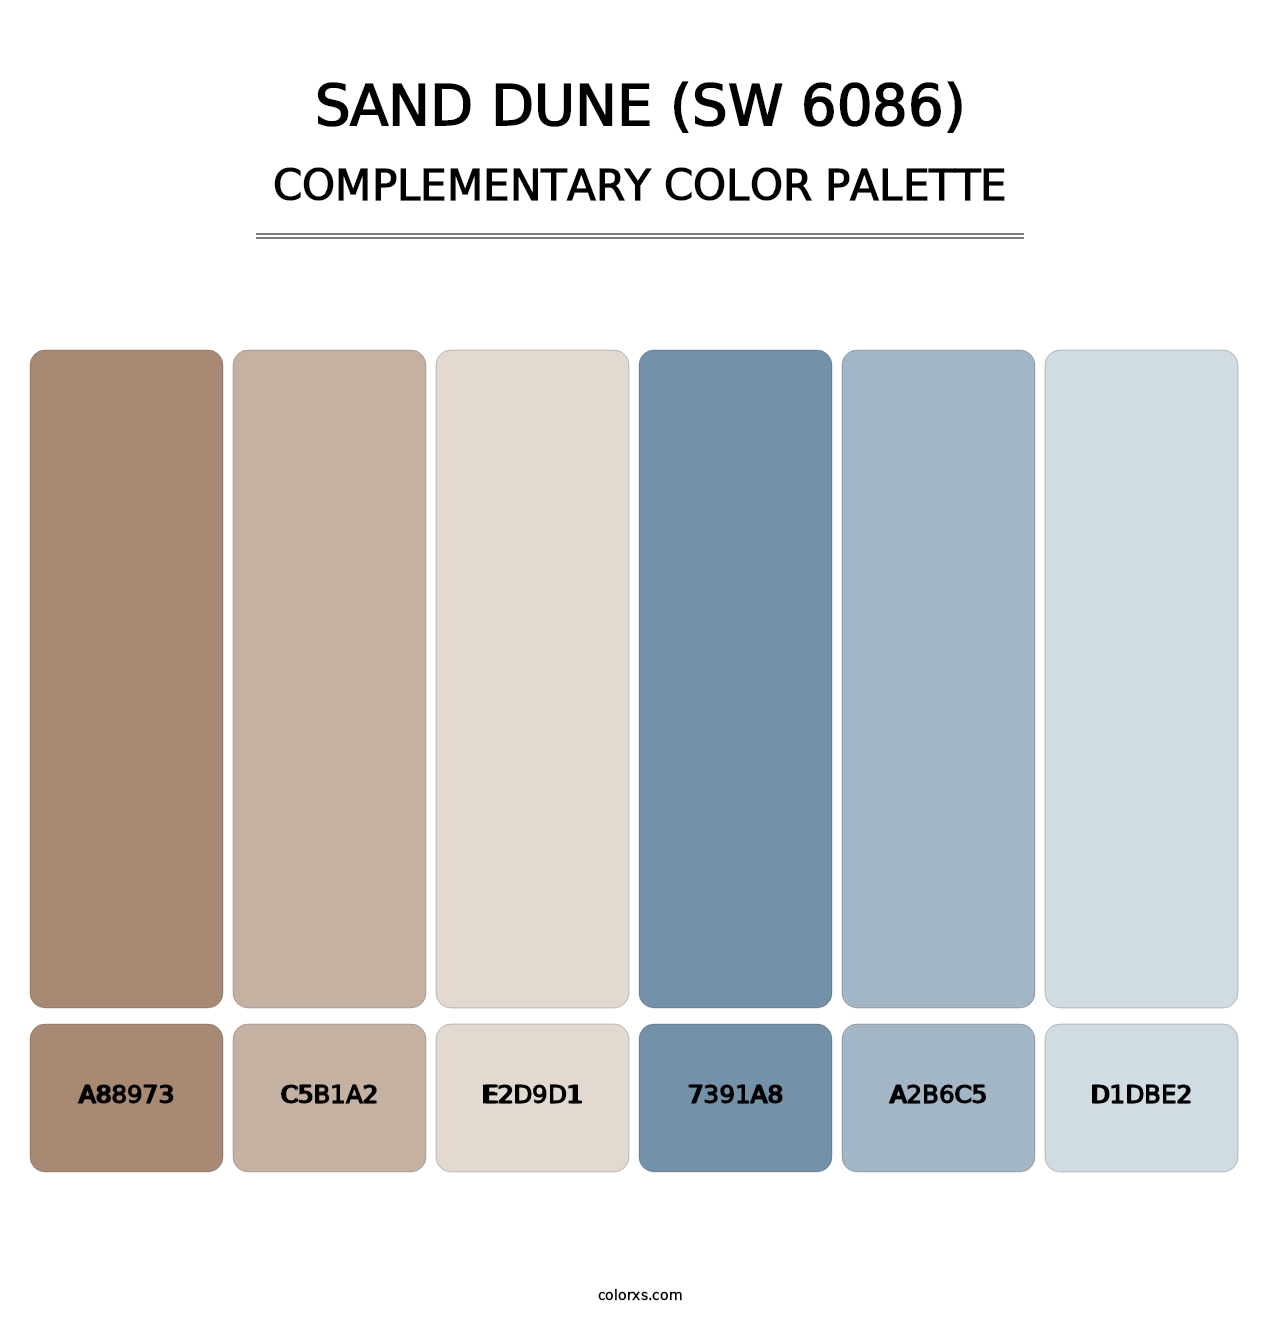 Sand Dune (SW 6086) - Complementary Color Palette